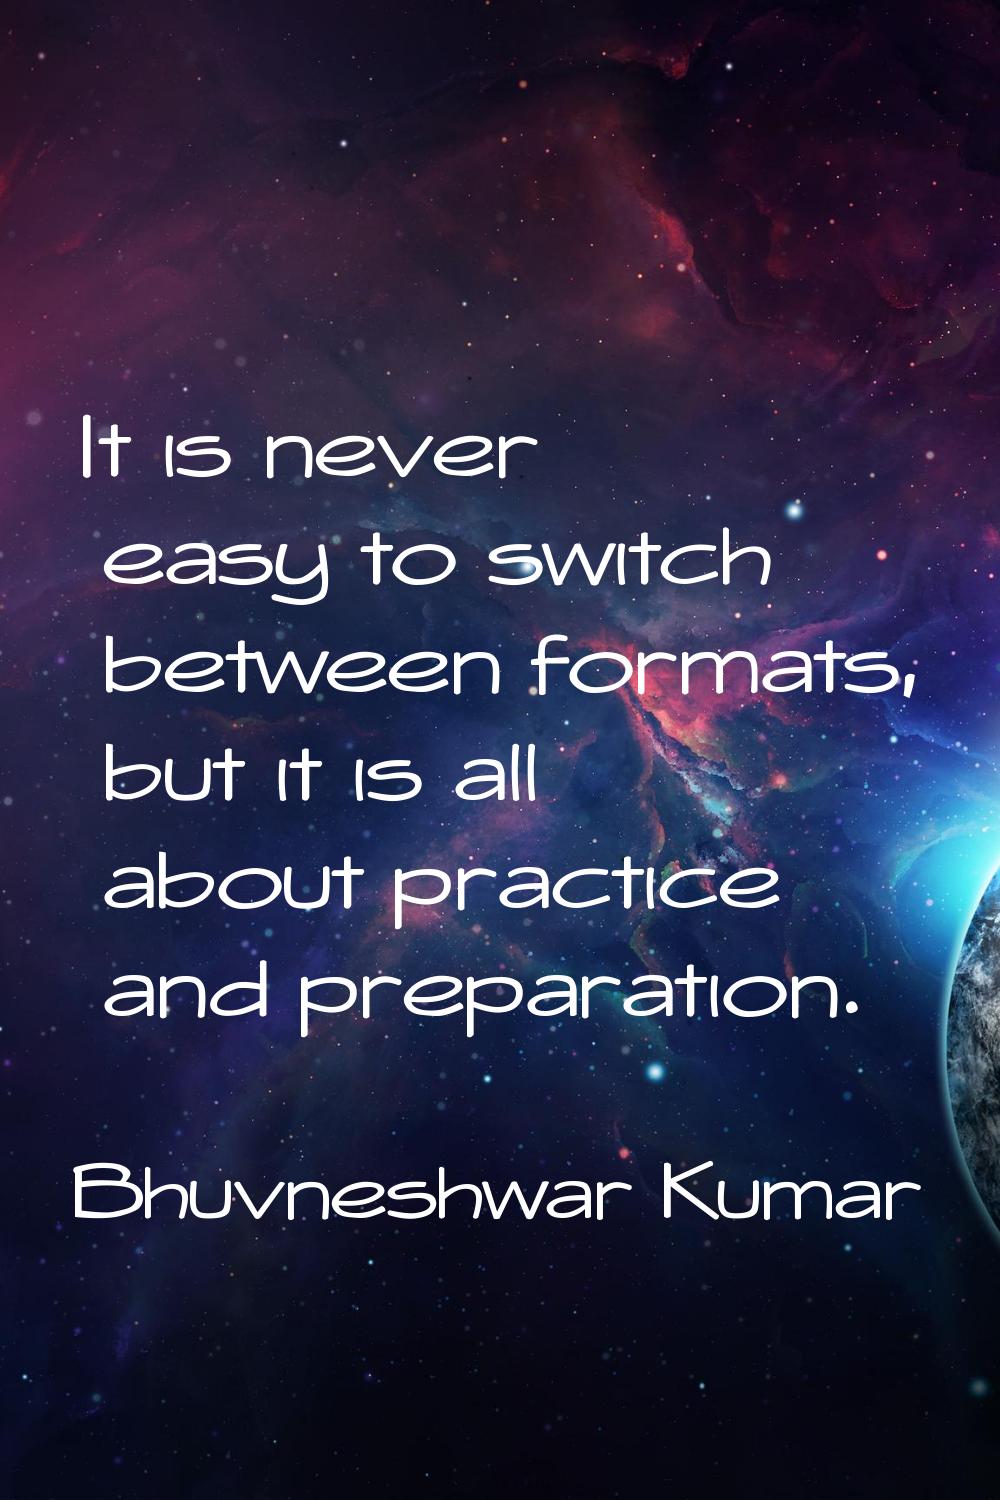 It is never easy to switch between formats, but it is all about practice and preparation.